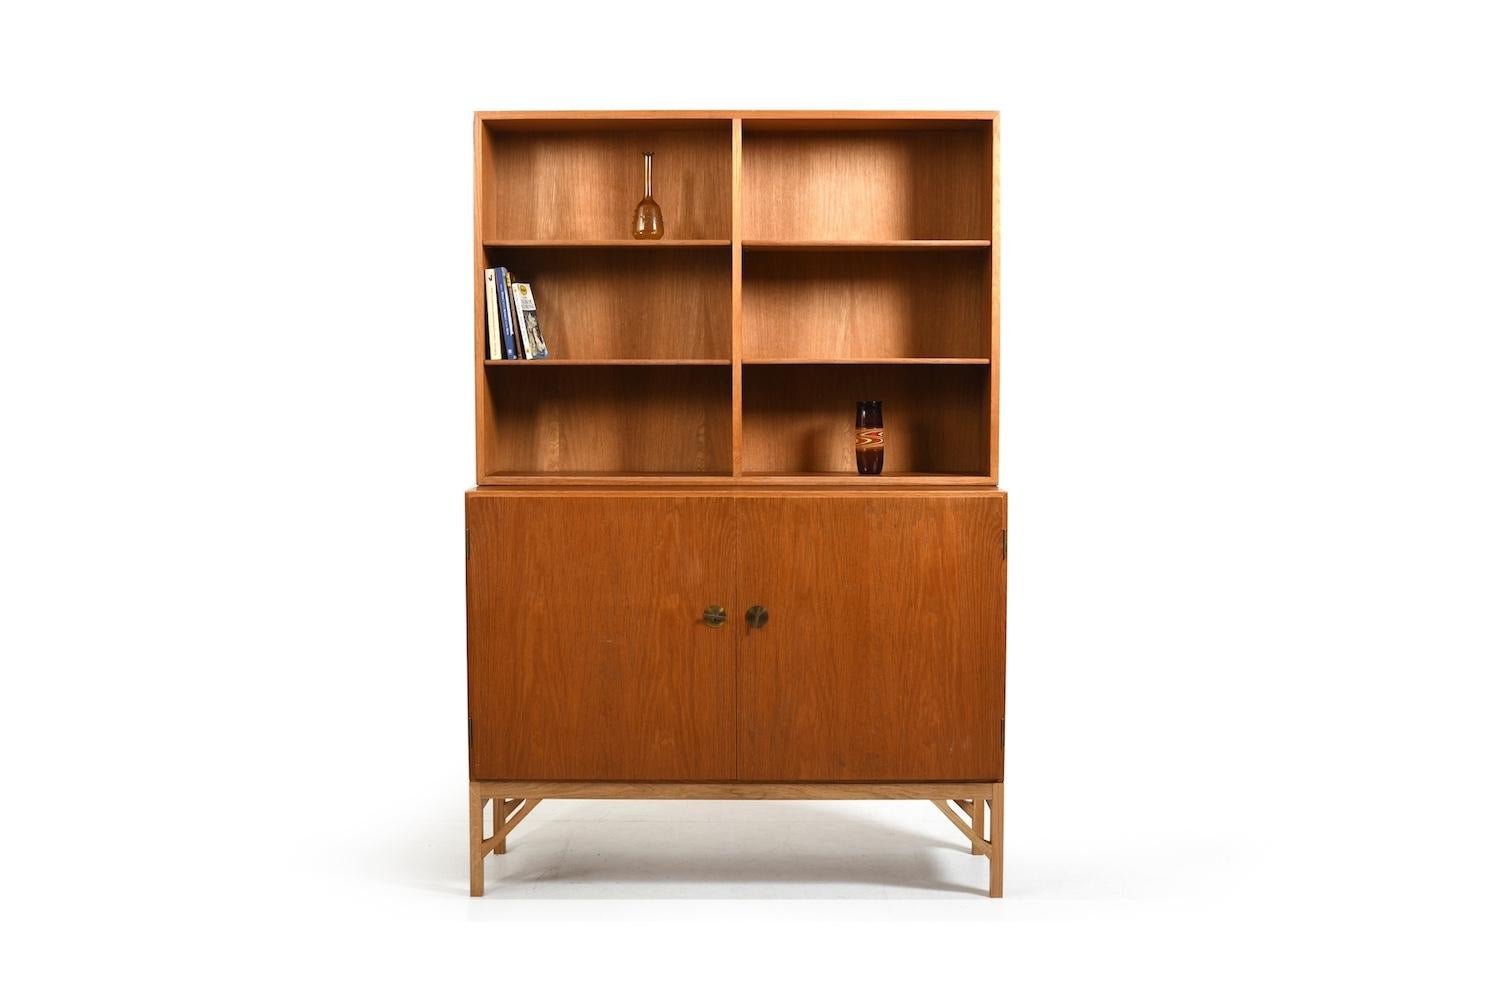 Cabinet, model no.232 with matching top shelf no.154 by Børge Mogensen for FDB Møbler. He designed his China Series in 1960s. Made in oak and produced 1960s.